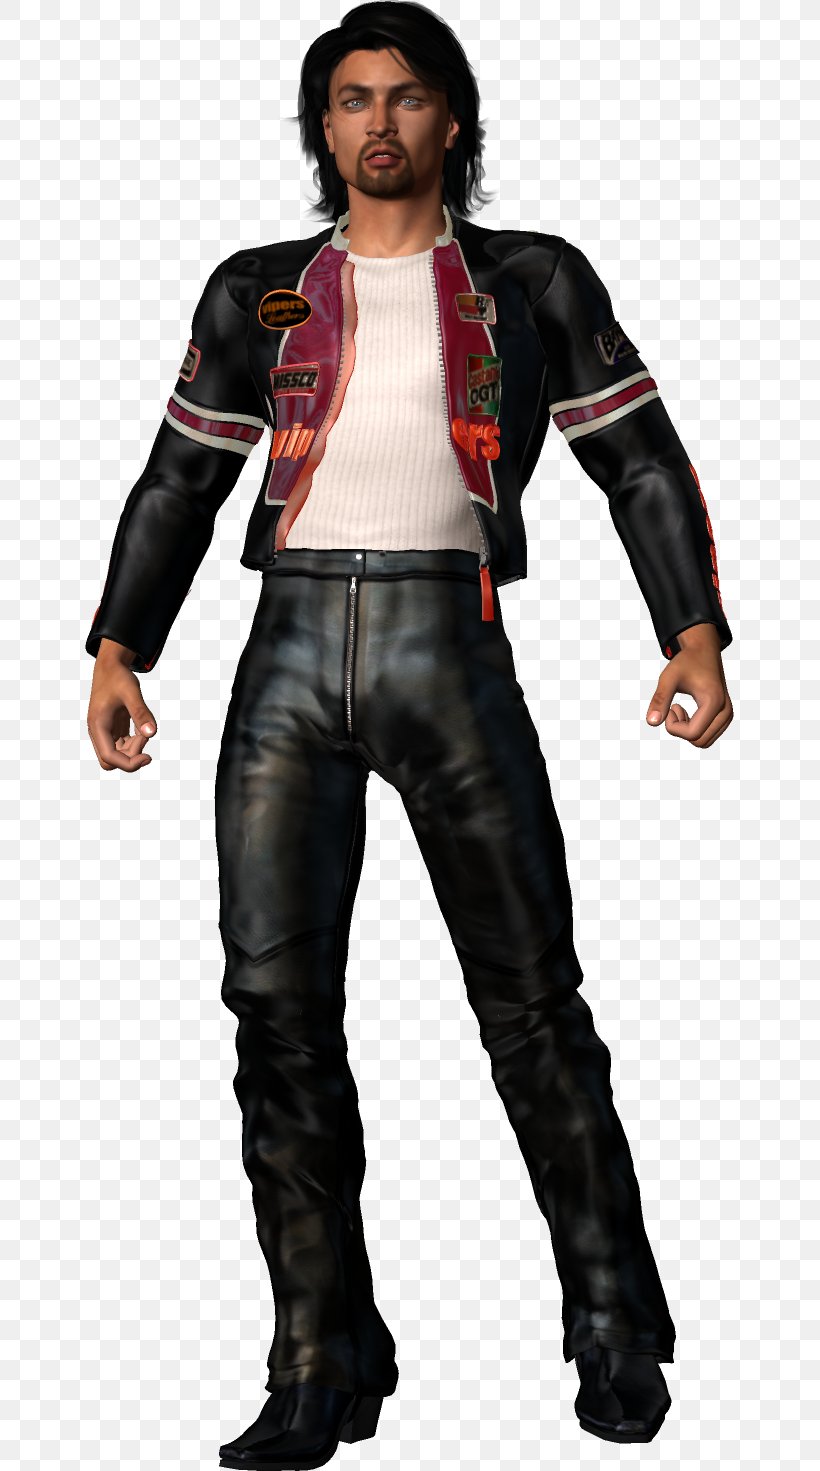 Leather Jacket, PNG, 649x1471px, Leather Jacket, Costume, Jacket, Leather, Outerwear Download Free